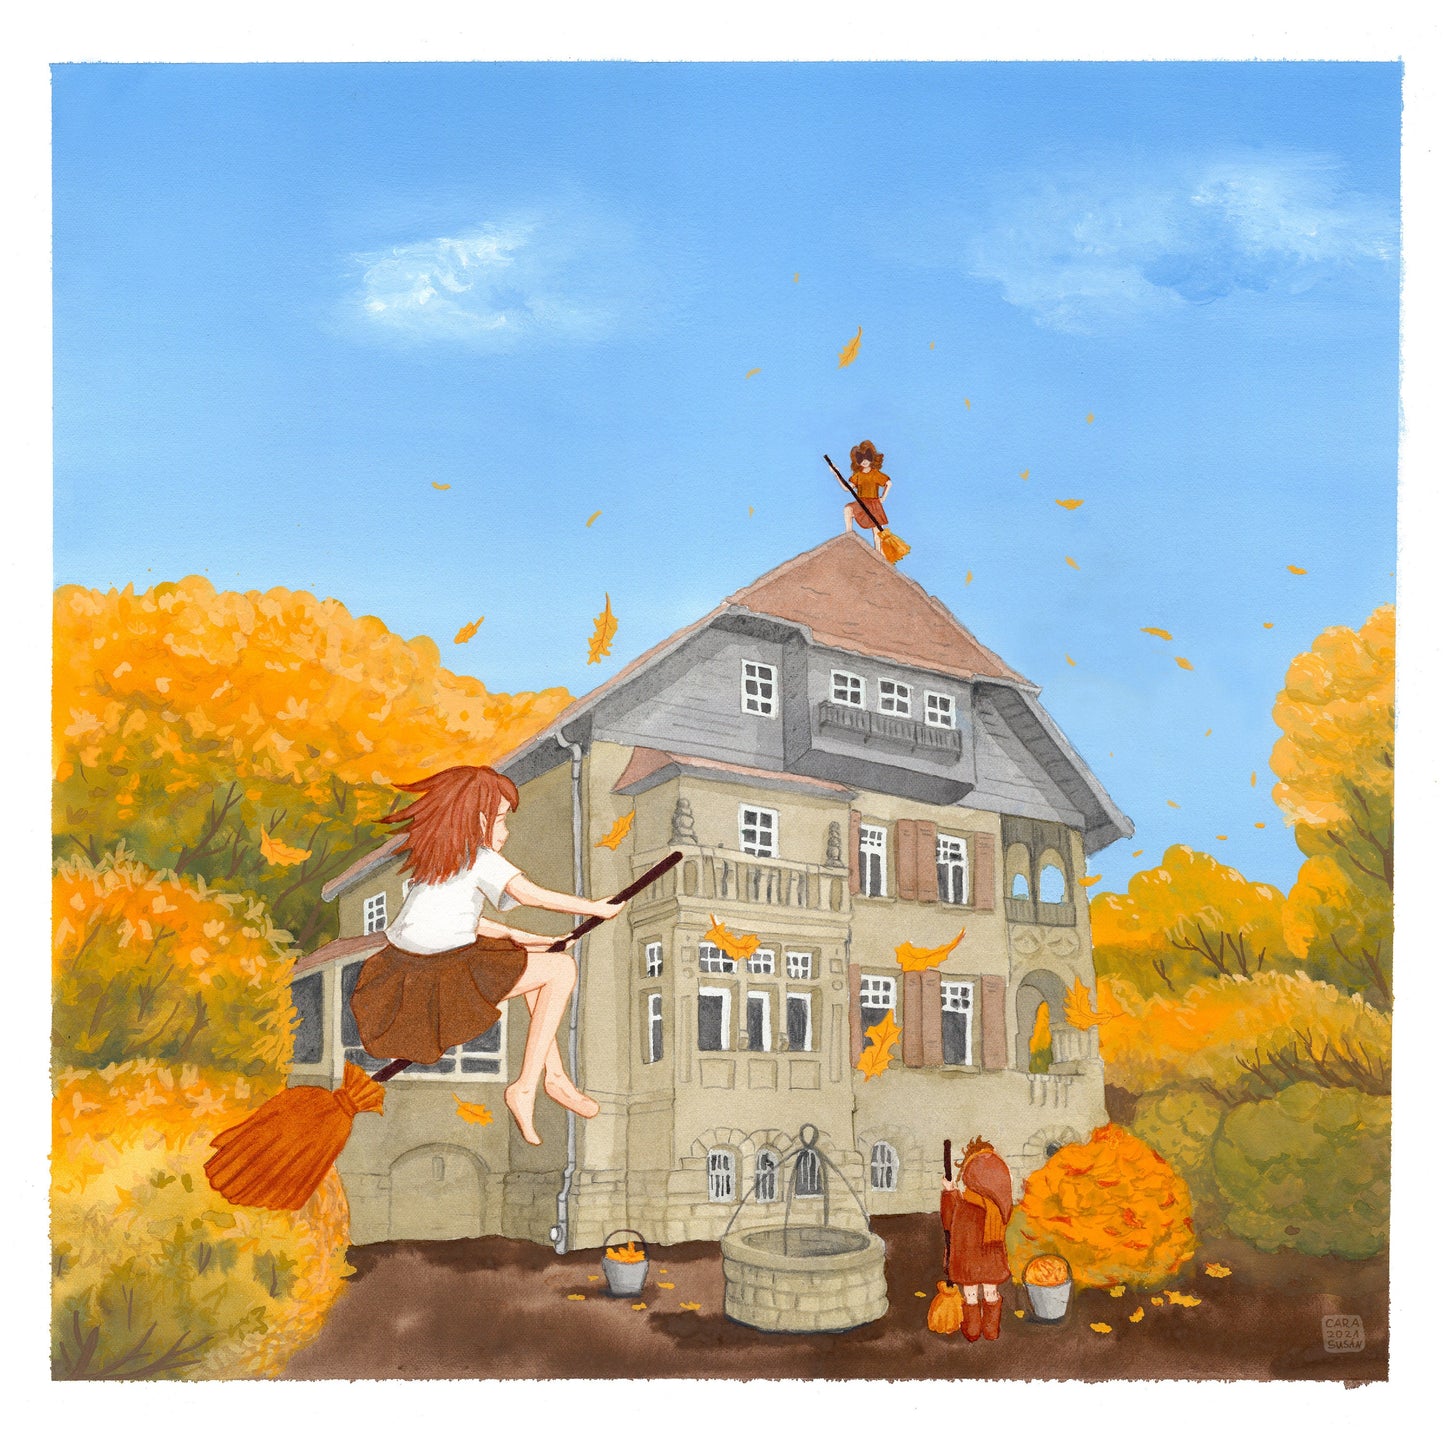 Witches doing autumn cleaning ca.30x30cm - art print on watercolor paper - signed and limited